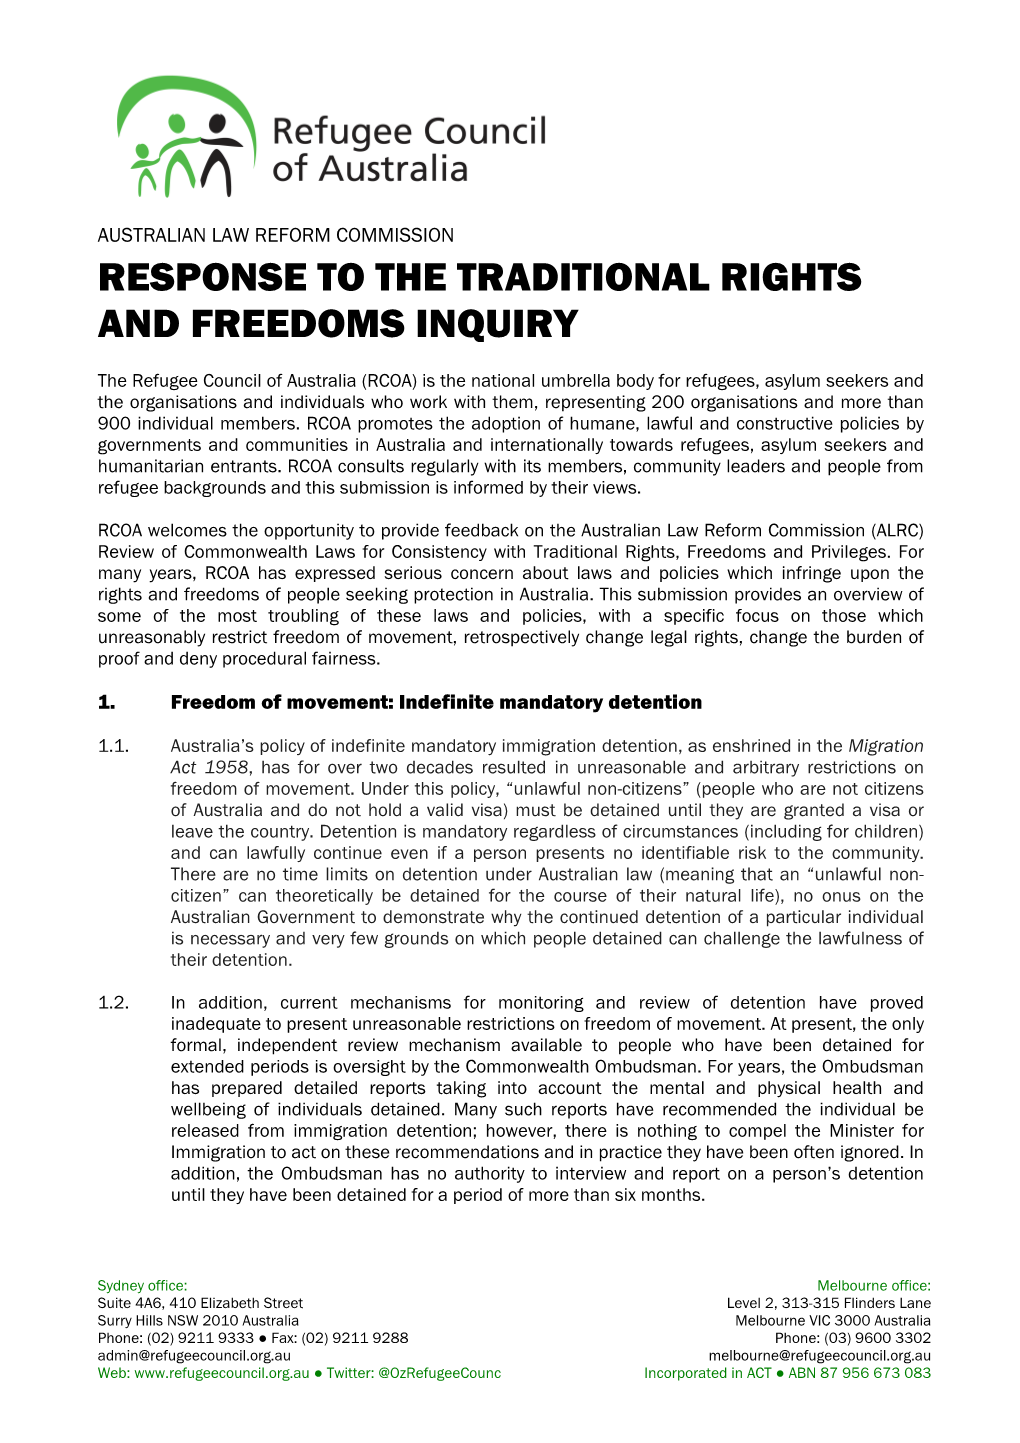 Response to the Traditional Rights and Freedoms Inquiry